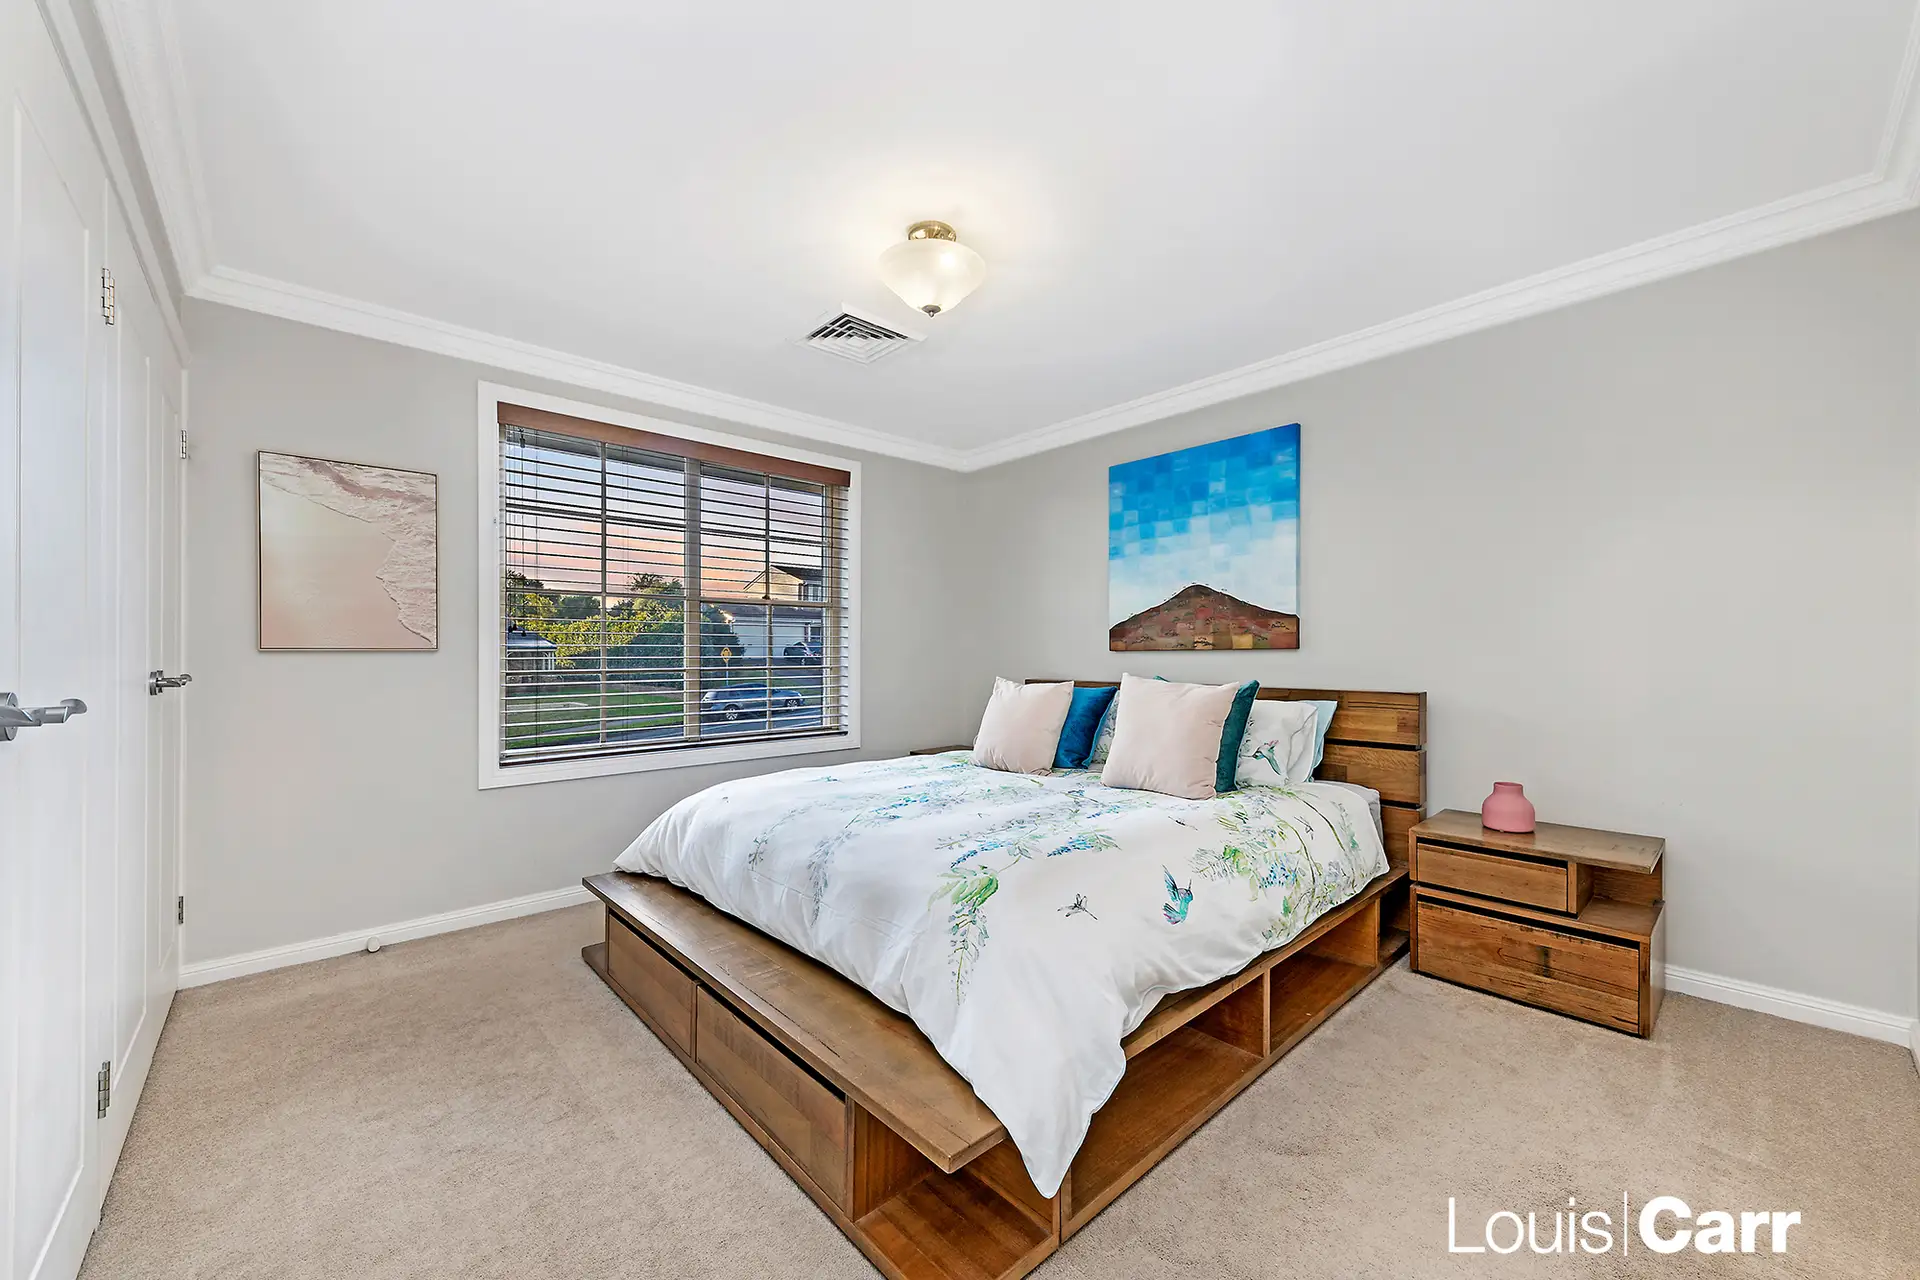 Photo #9: 23 Yaringa Road, Castle Hill - Sold by Louis Carr Real Estate